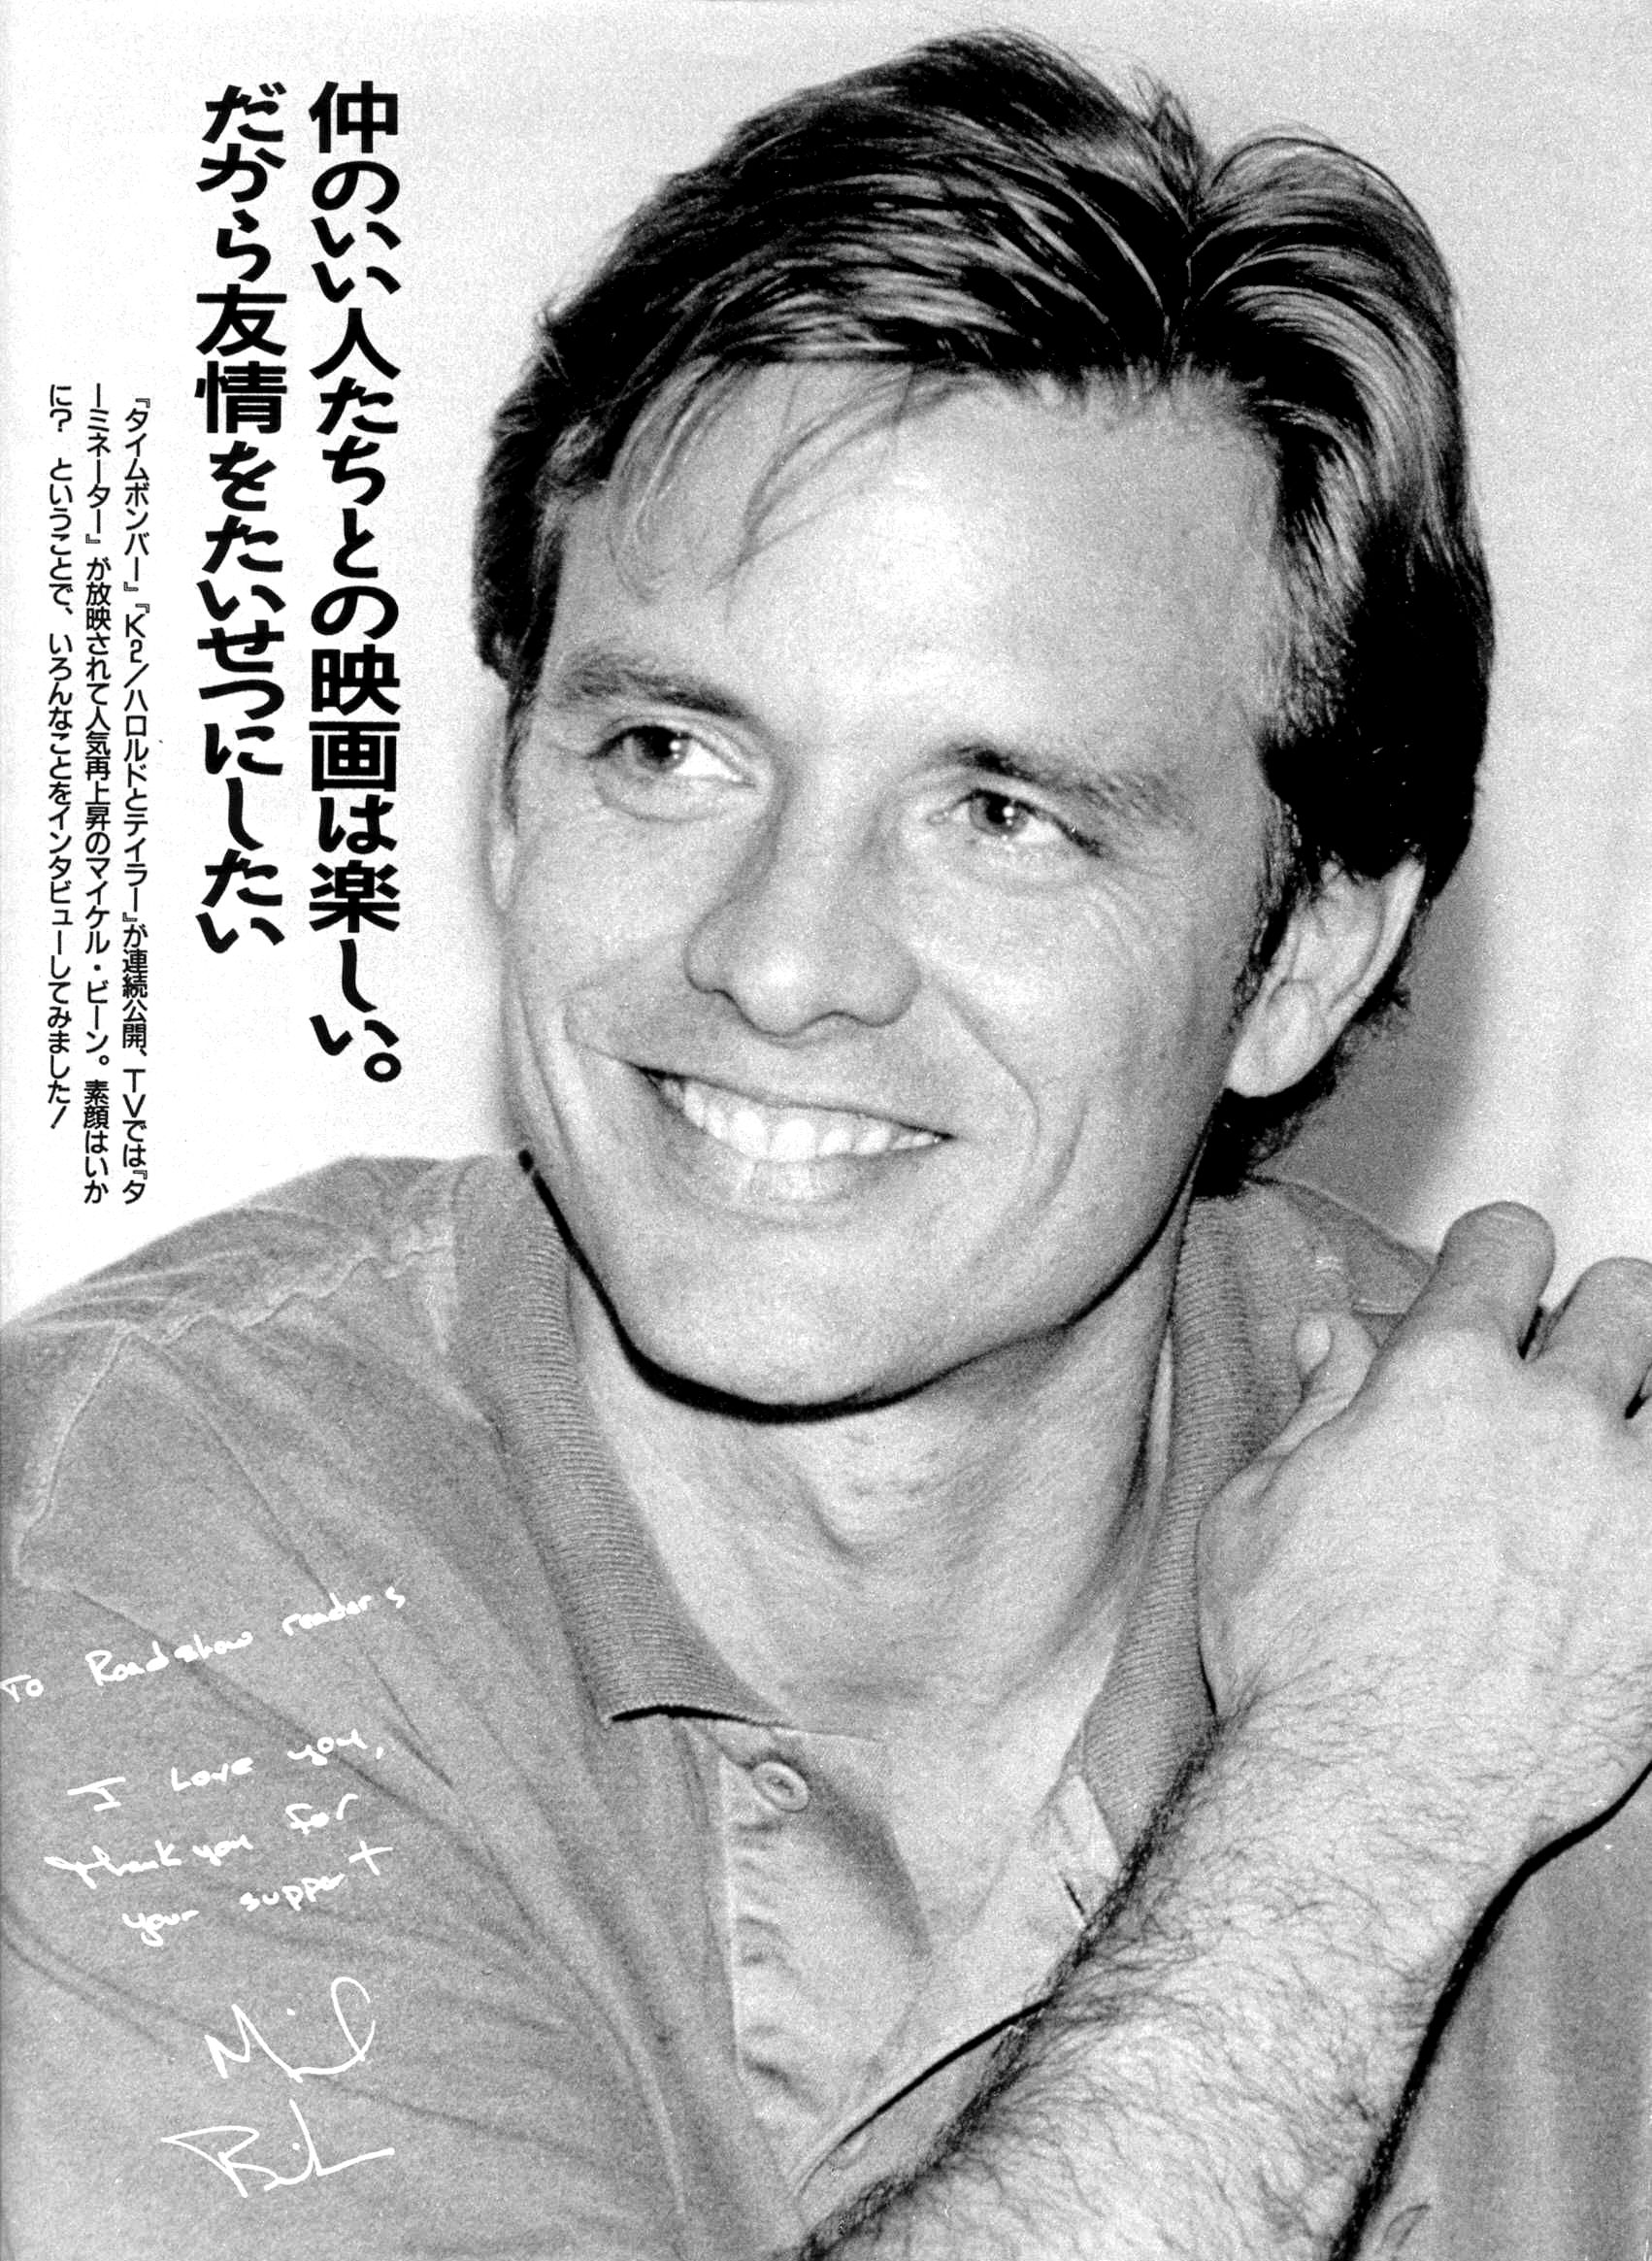 Japanese Magazine - Posters and Portraits - PAGE 9
Keywords: media_poster;candid_img